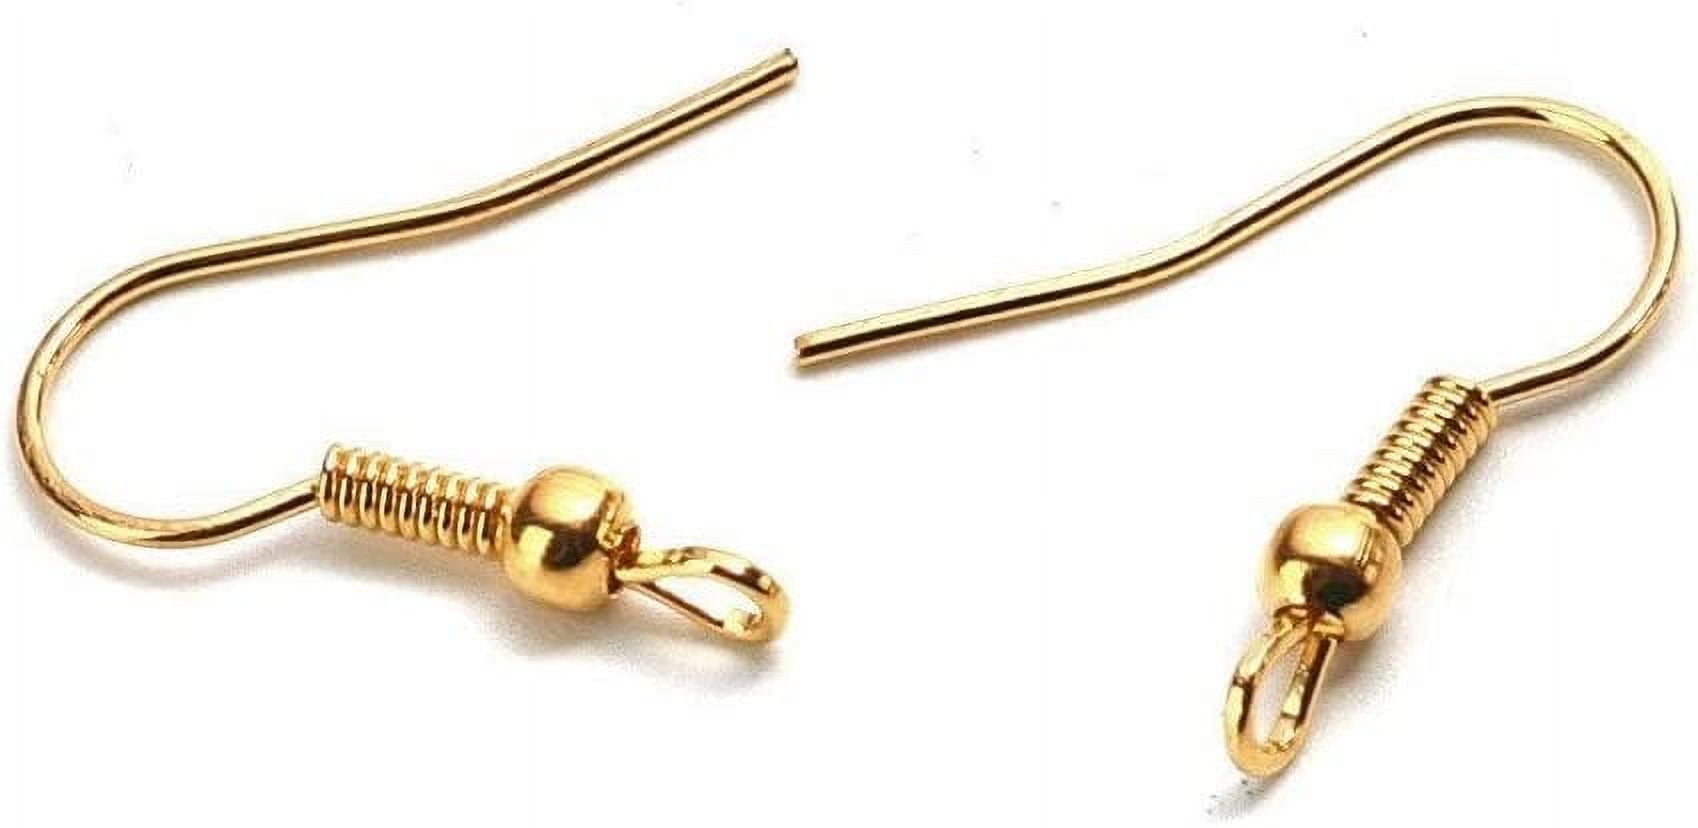 18K Gold Plated Spiral Earring Hooks With Loop, Gold Tone Hook Earrings for  Jewelry Making, Simple Earring Hooks, Ear Wire,earring Component 